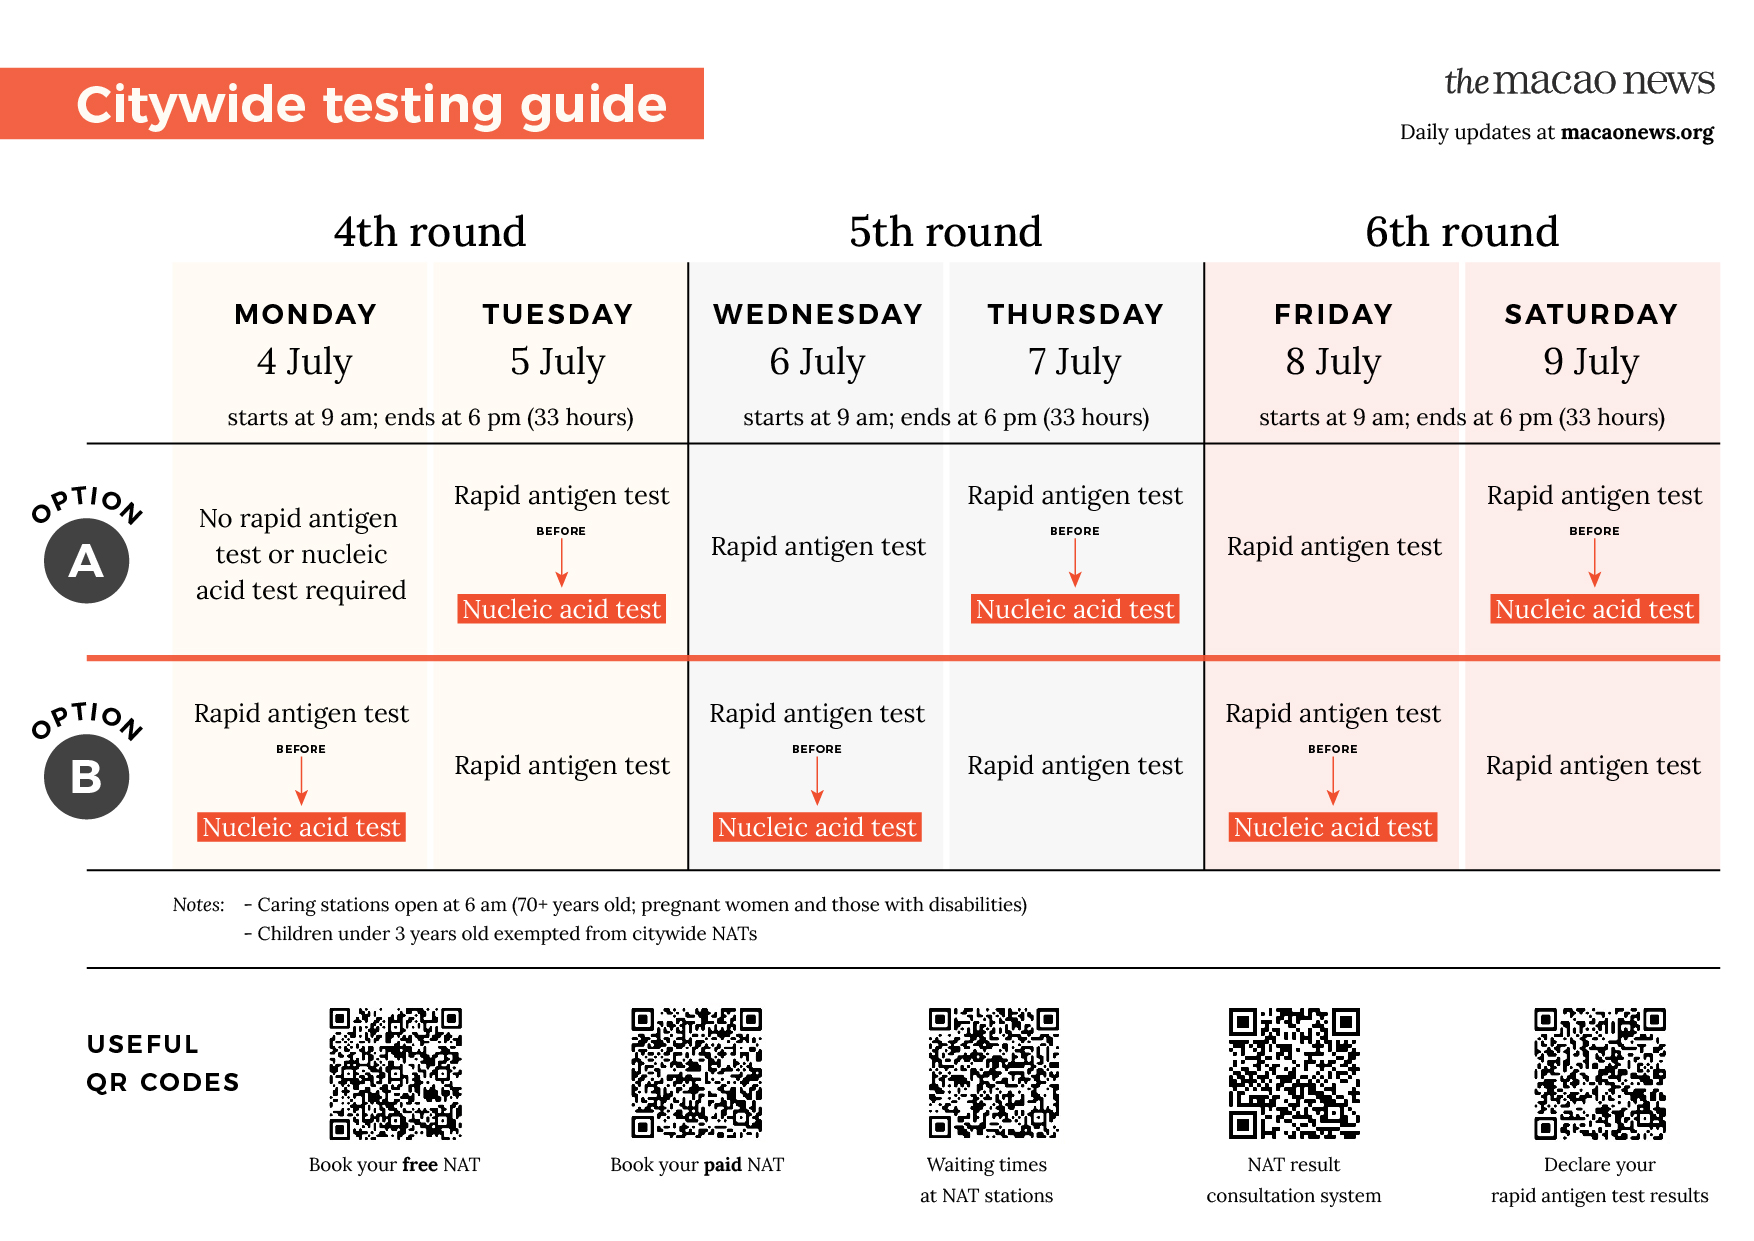 Macao Covid-19 citywide testing guide